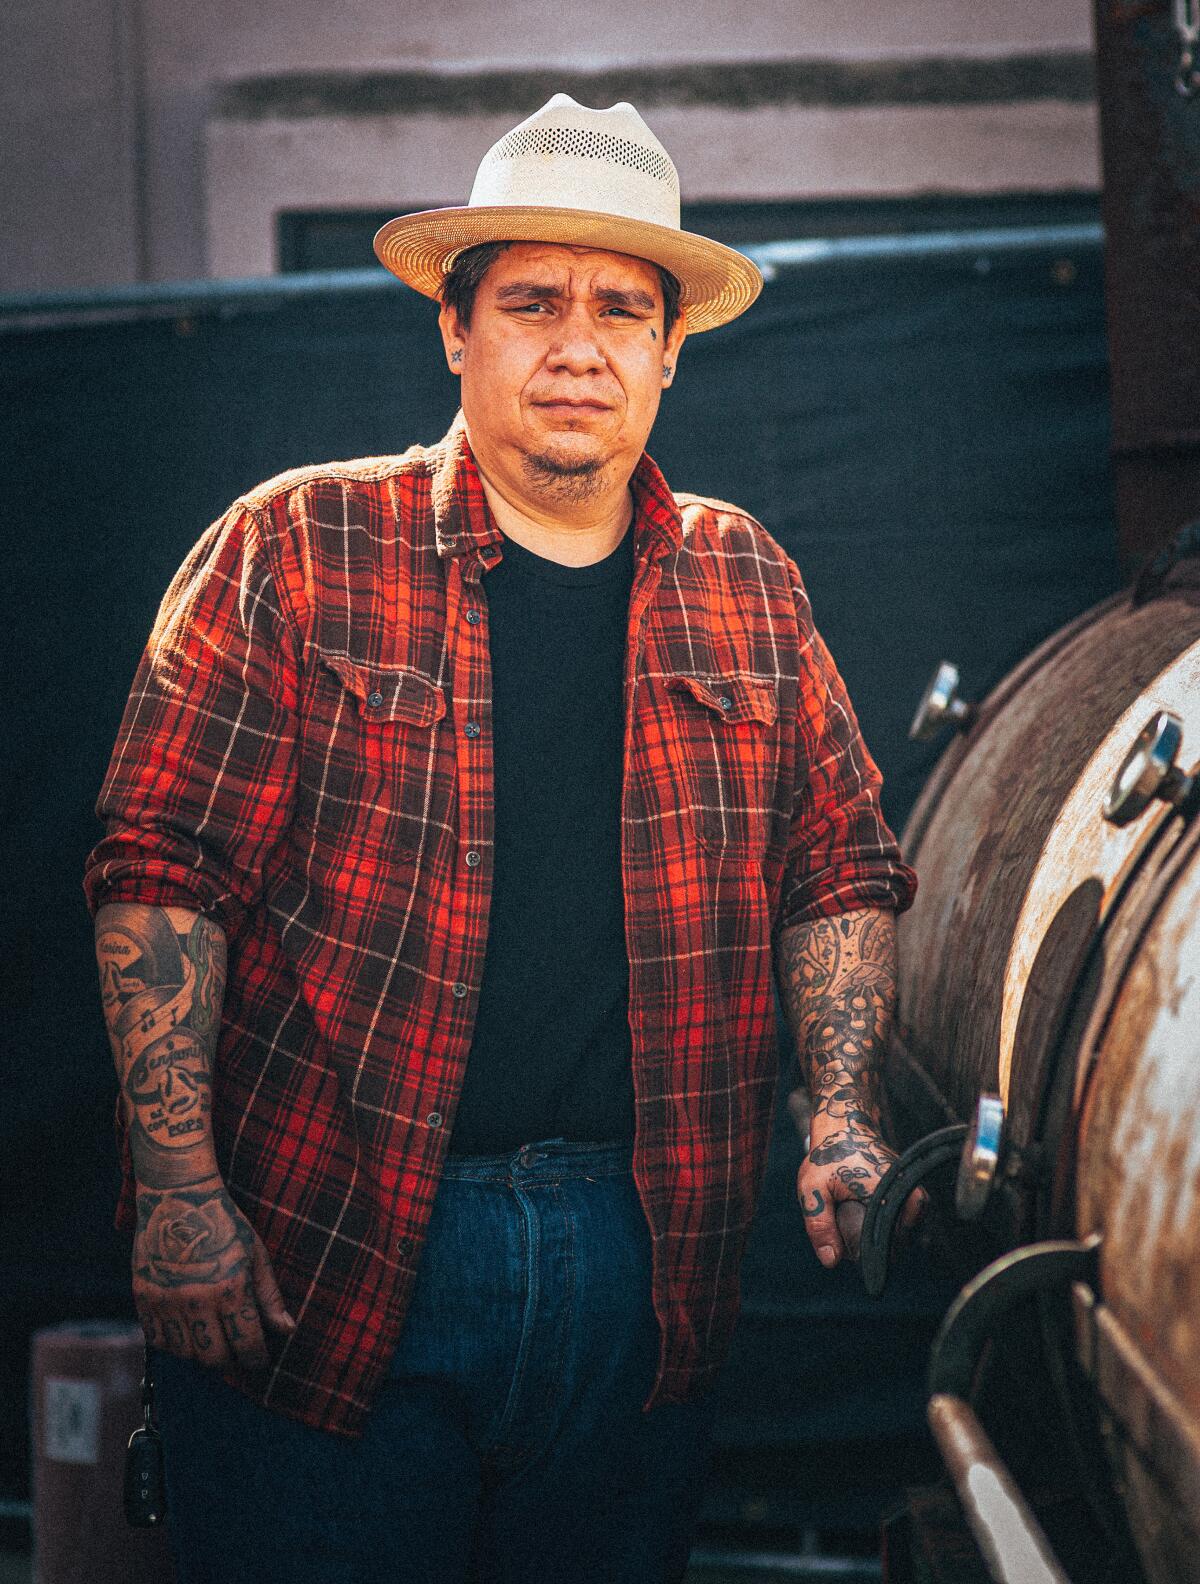 Pitmaster and owner Daniel Castillo stands next to a 1,000-gallon offset smoker at Heritage Barbecue.